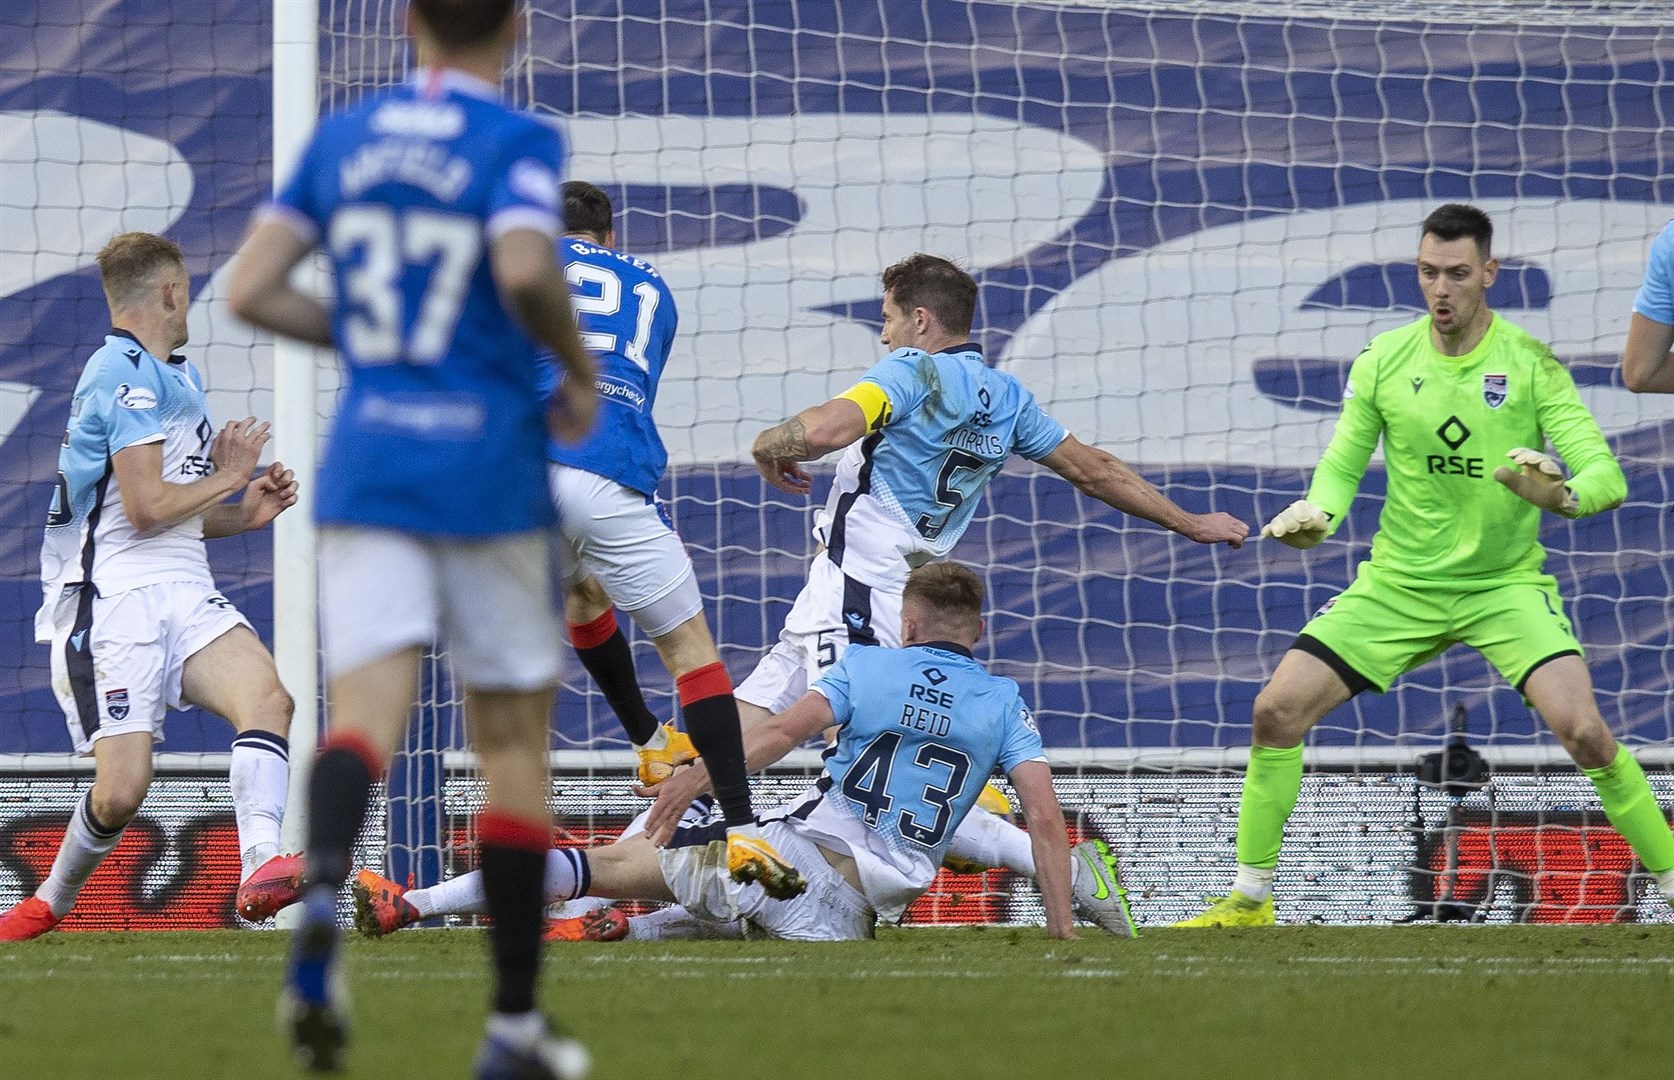 Ross Laidlaw could with a fourth clean sheet of the season against Arbroath after conceding three last time out.